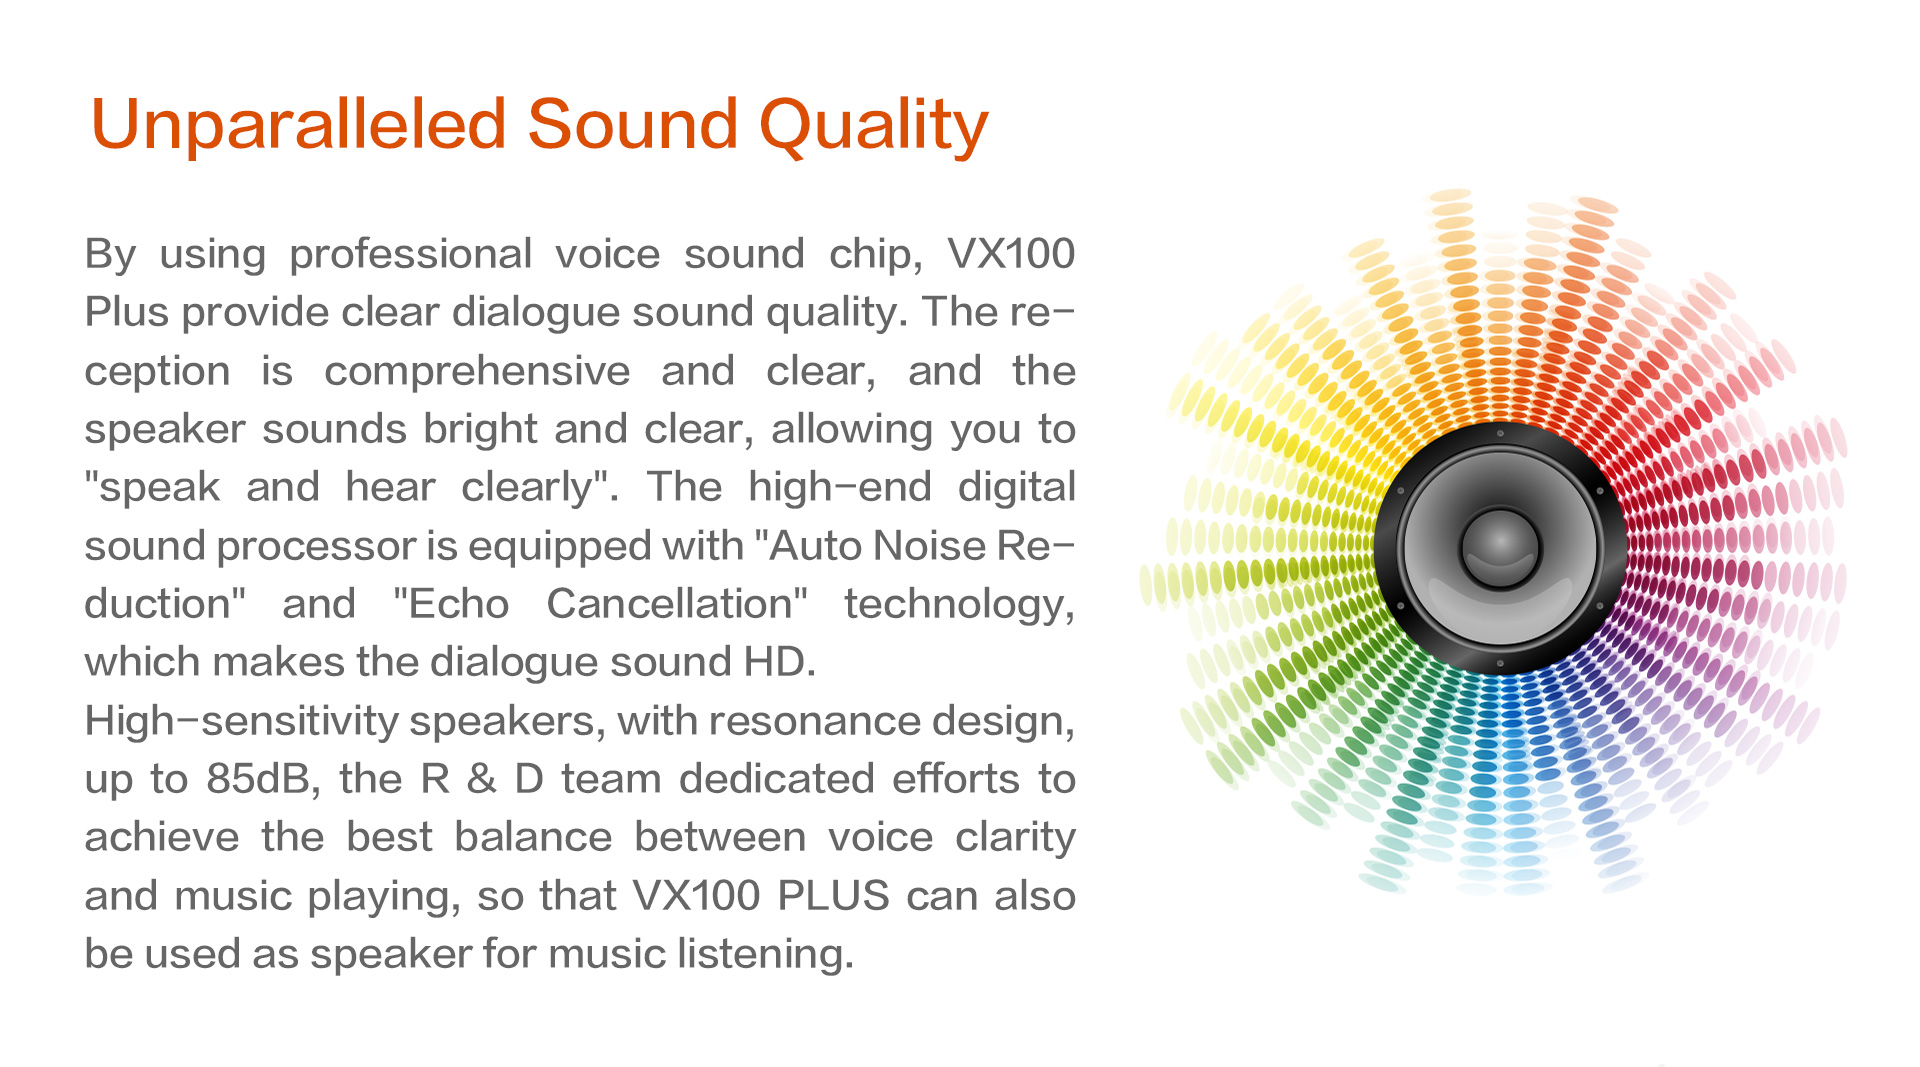 Unparalleled Sound Quality